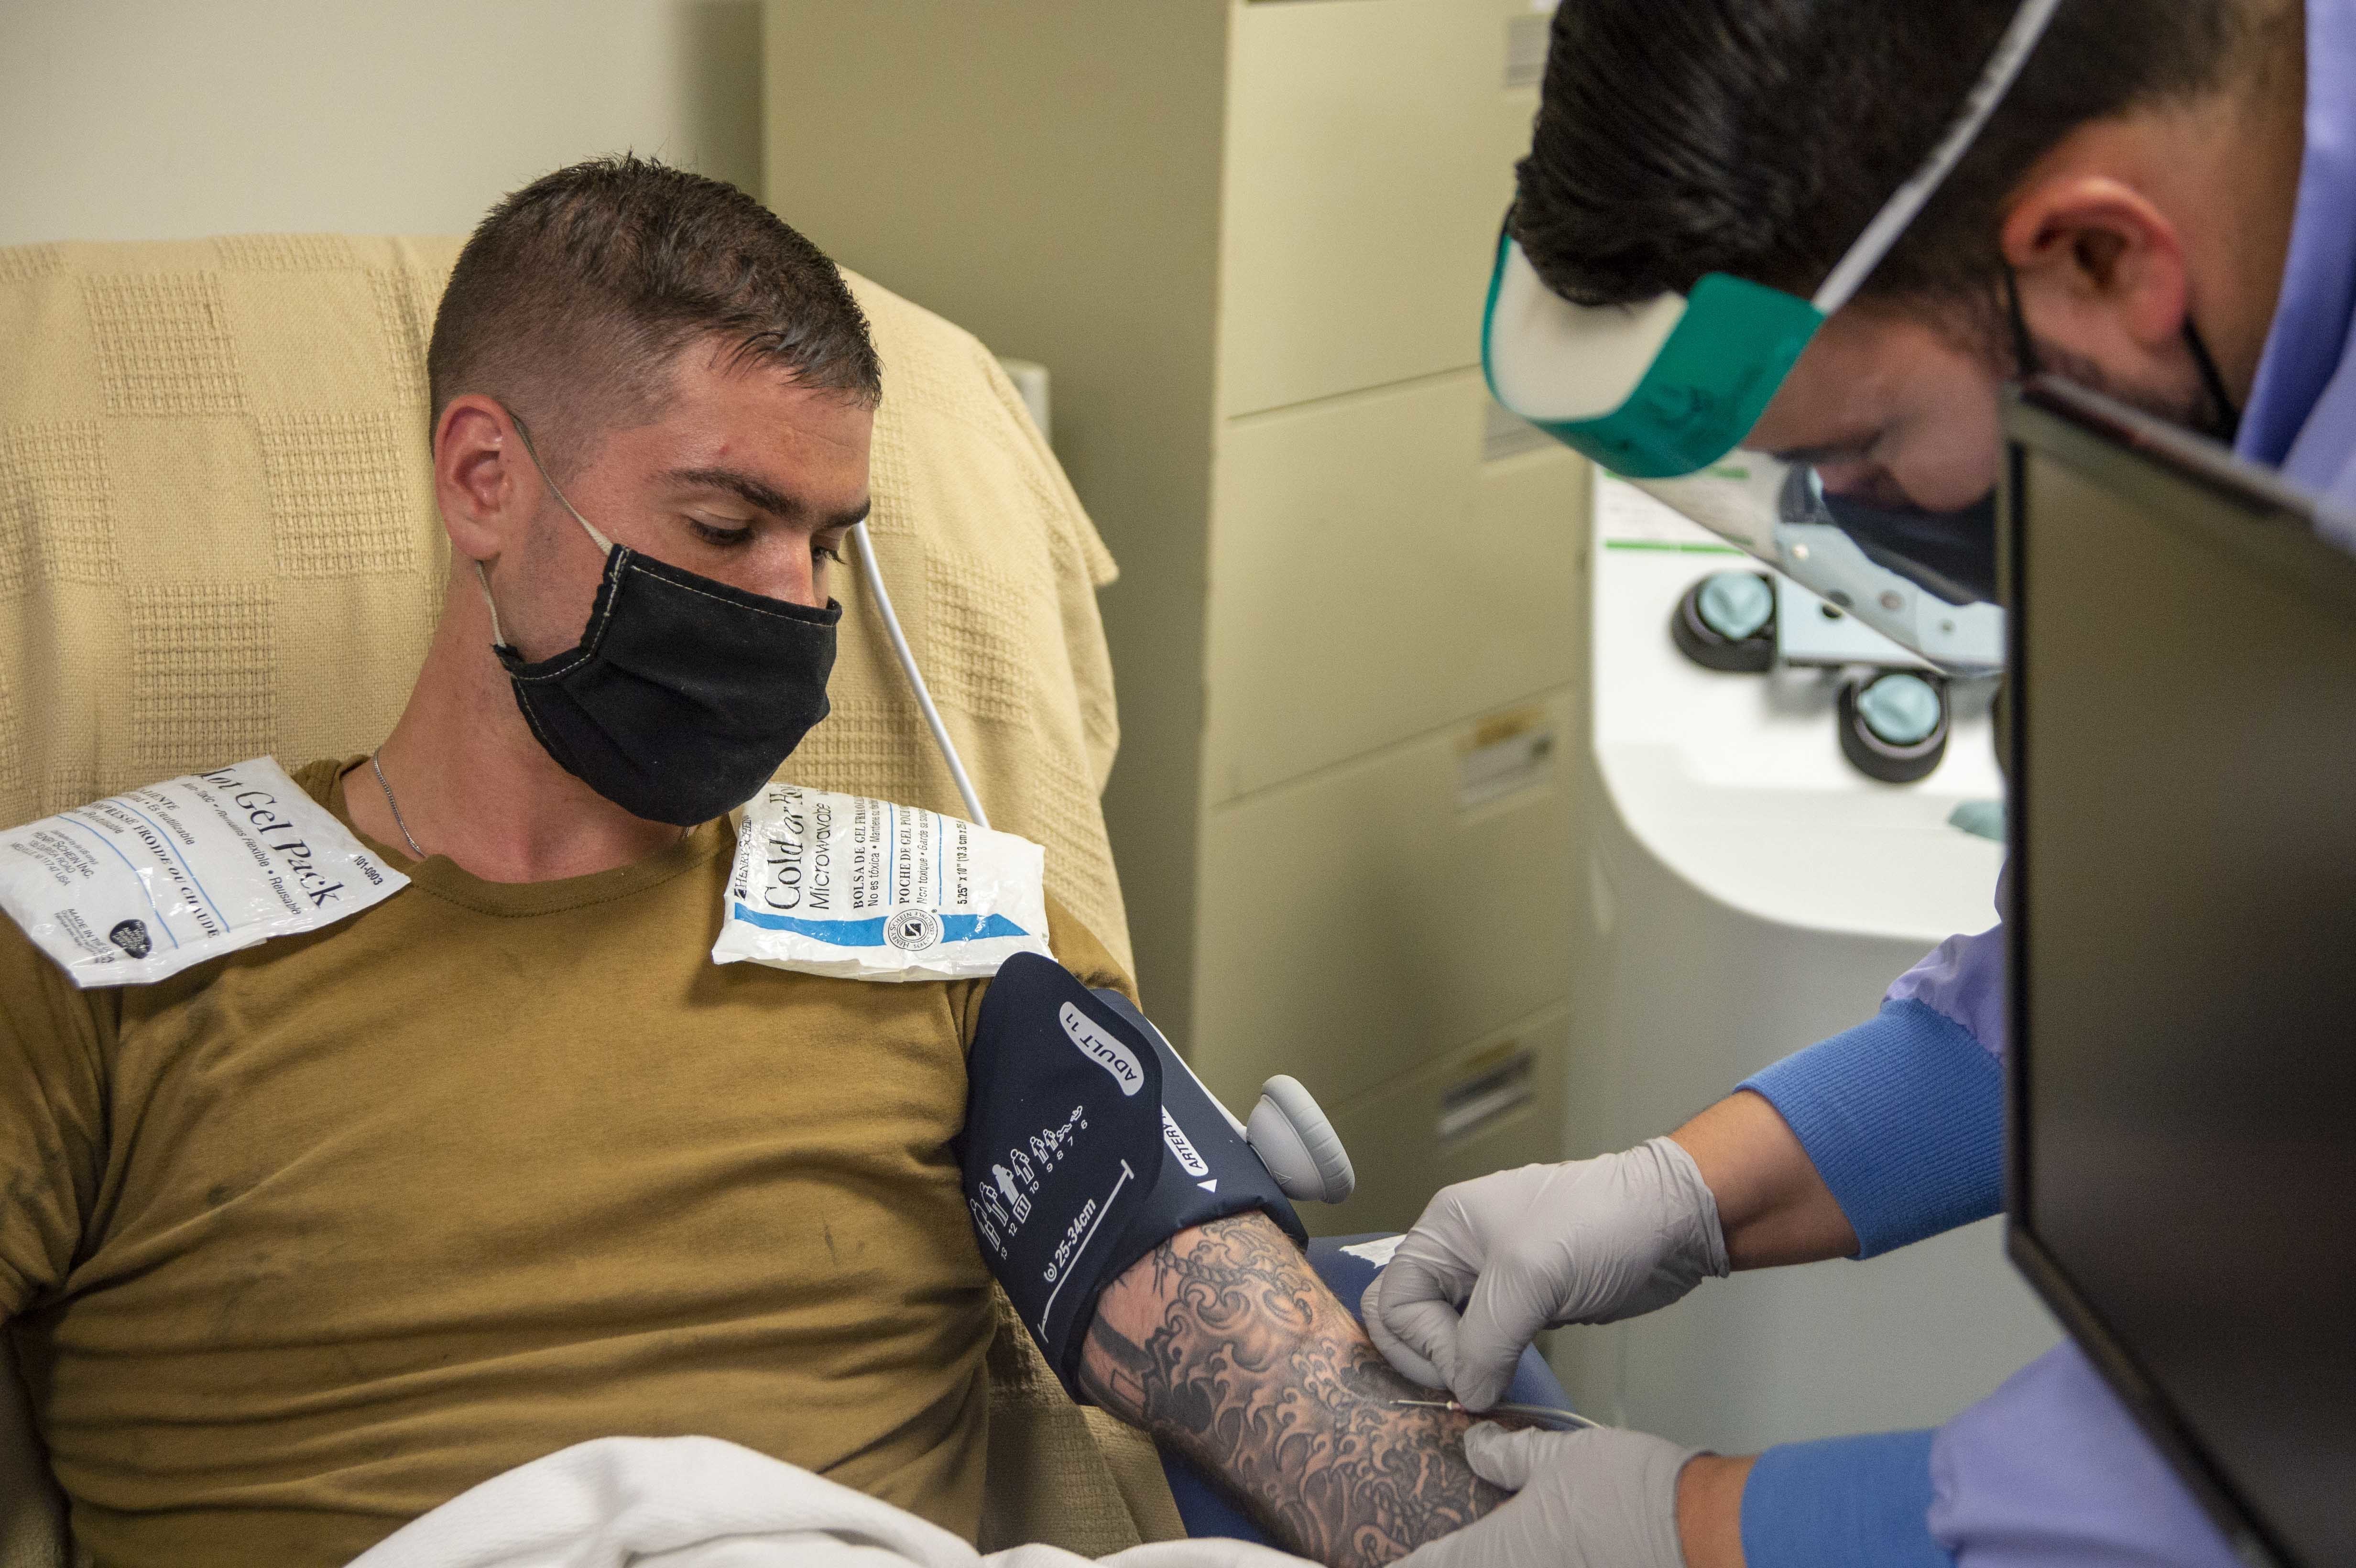 Jesus Gonzalez, a phlebotomist assigned to Naval Medical Center San Diego (NMCSD), inserts a needle into the arm of Aviation Boatswain's Mate (Equipment) 2nd Class Bryan Bennett,.